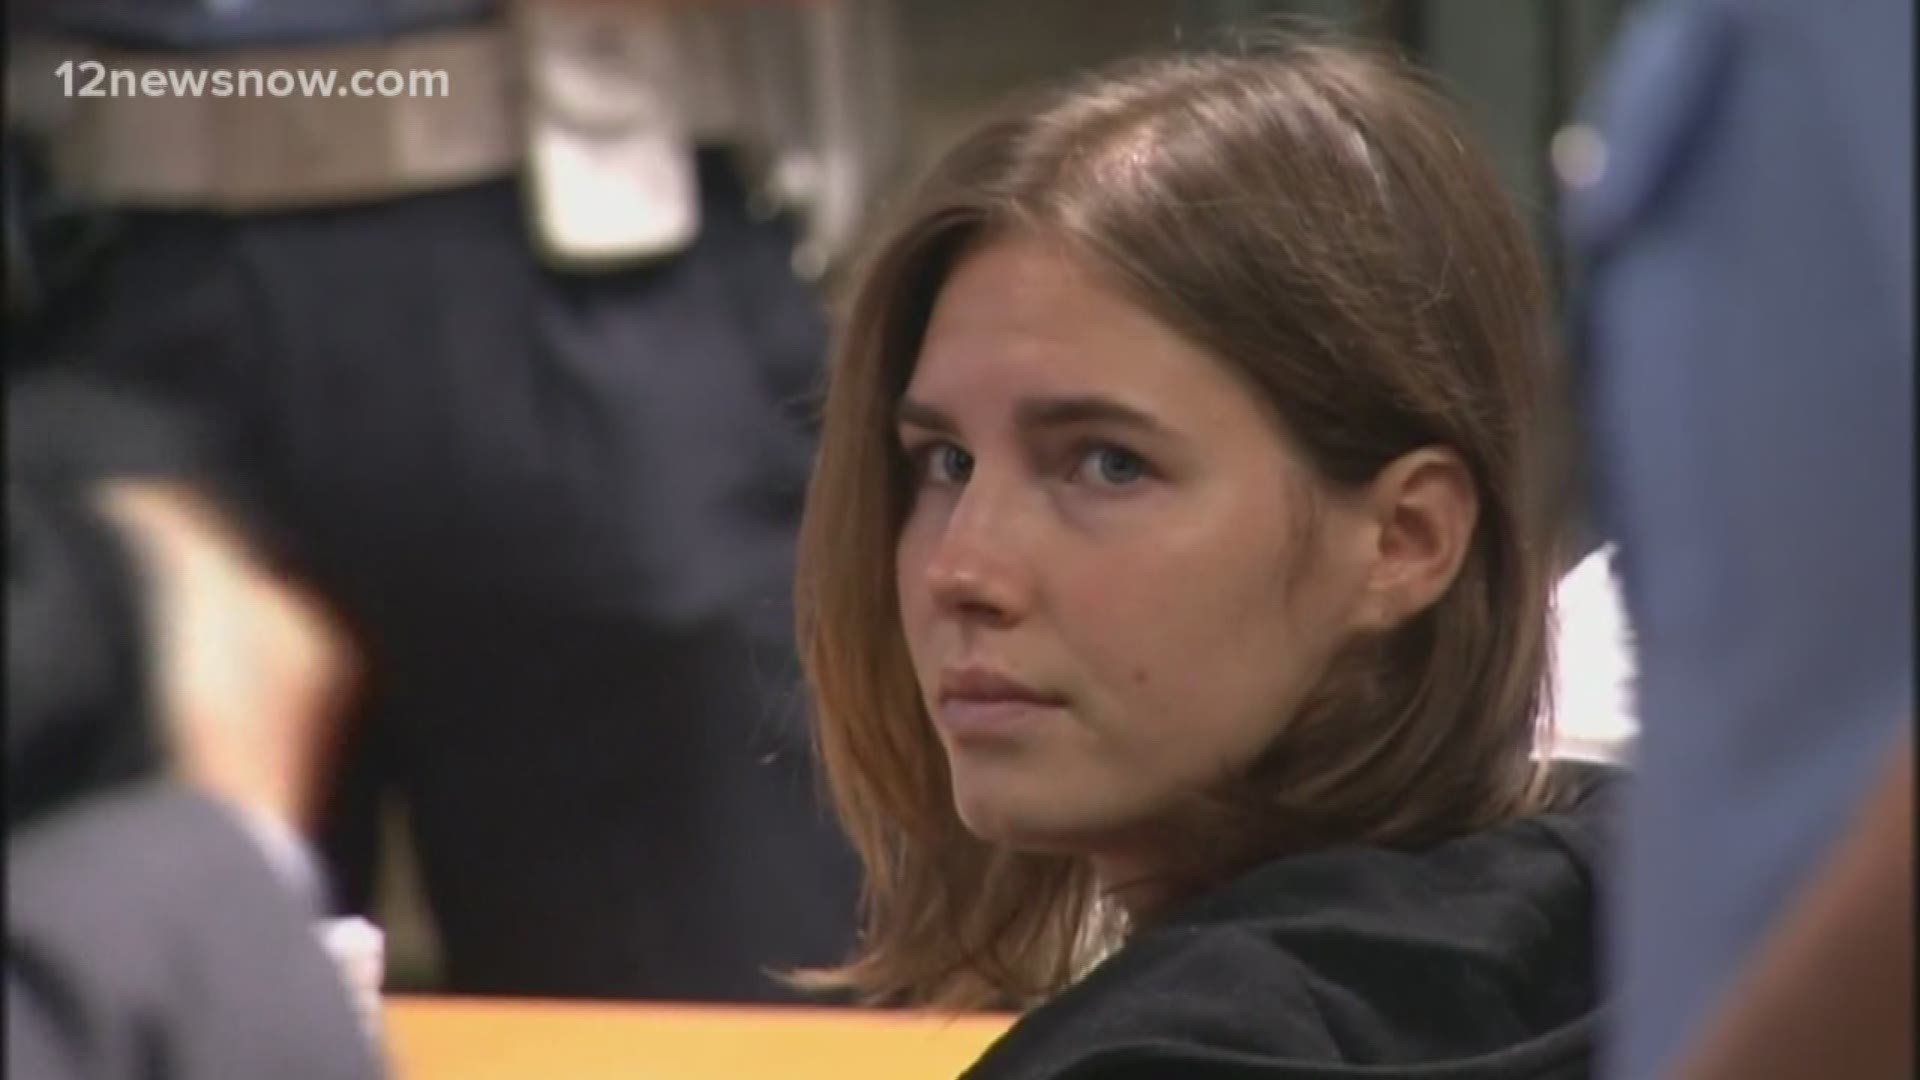 Amanda Knox is returning to Italy this week for the first time since she was cleared of manslaughter.